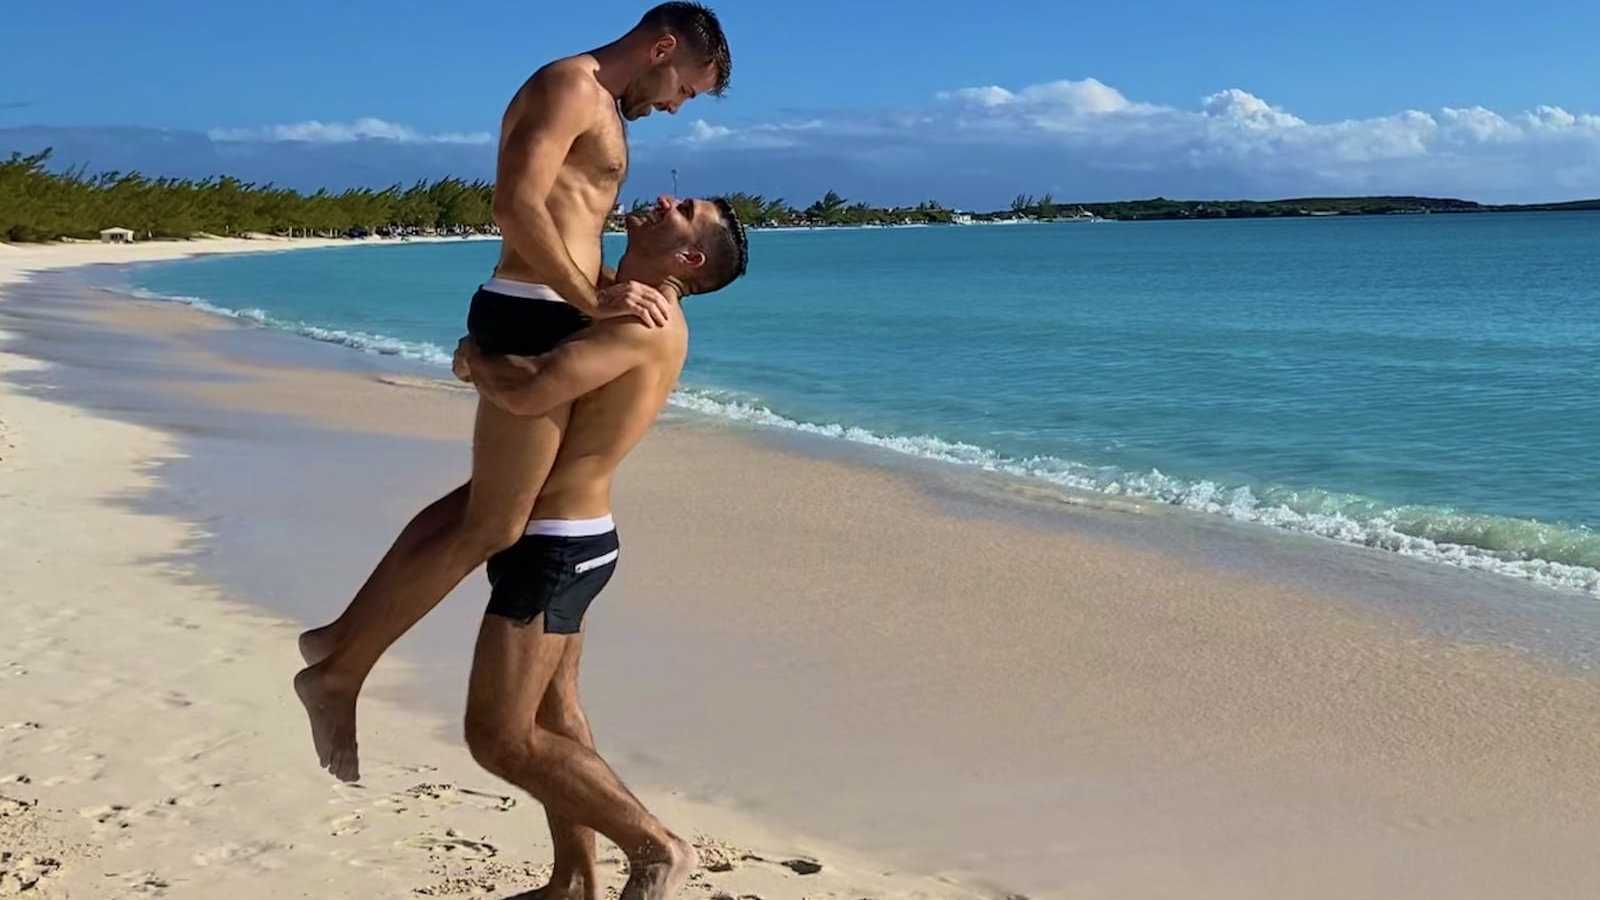 There a few excellent gay beaches in Playa del Carmen to relax or play